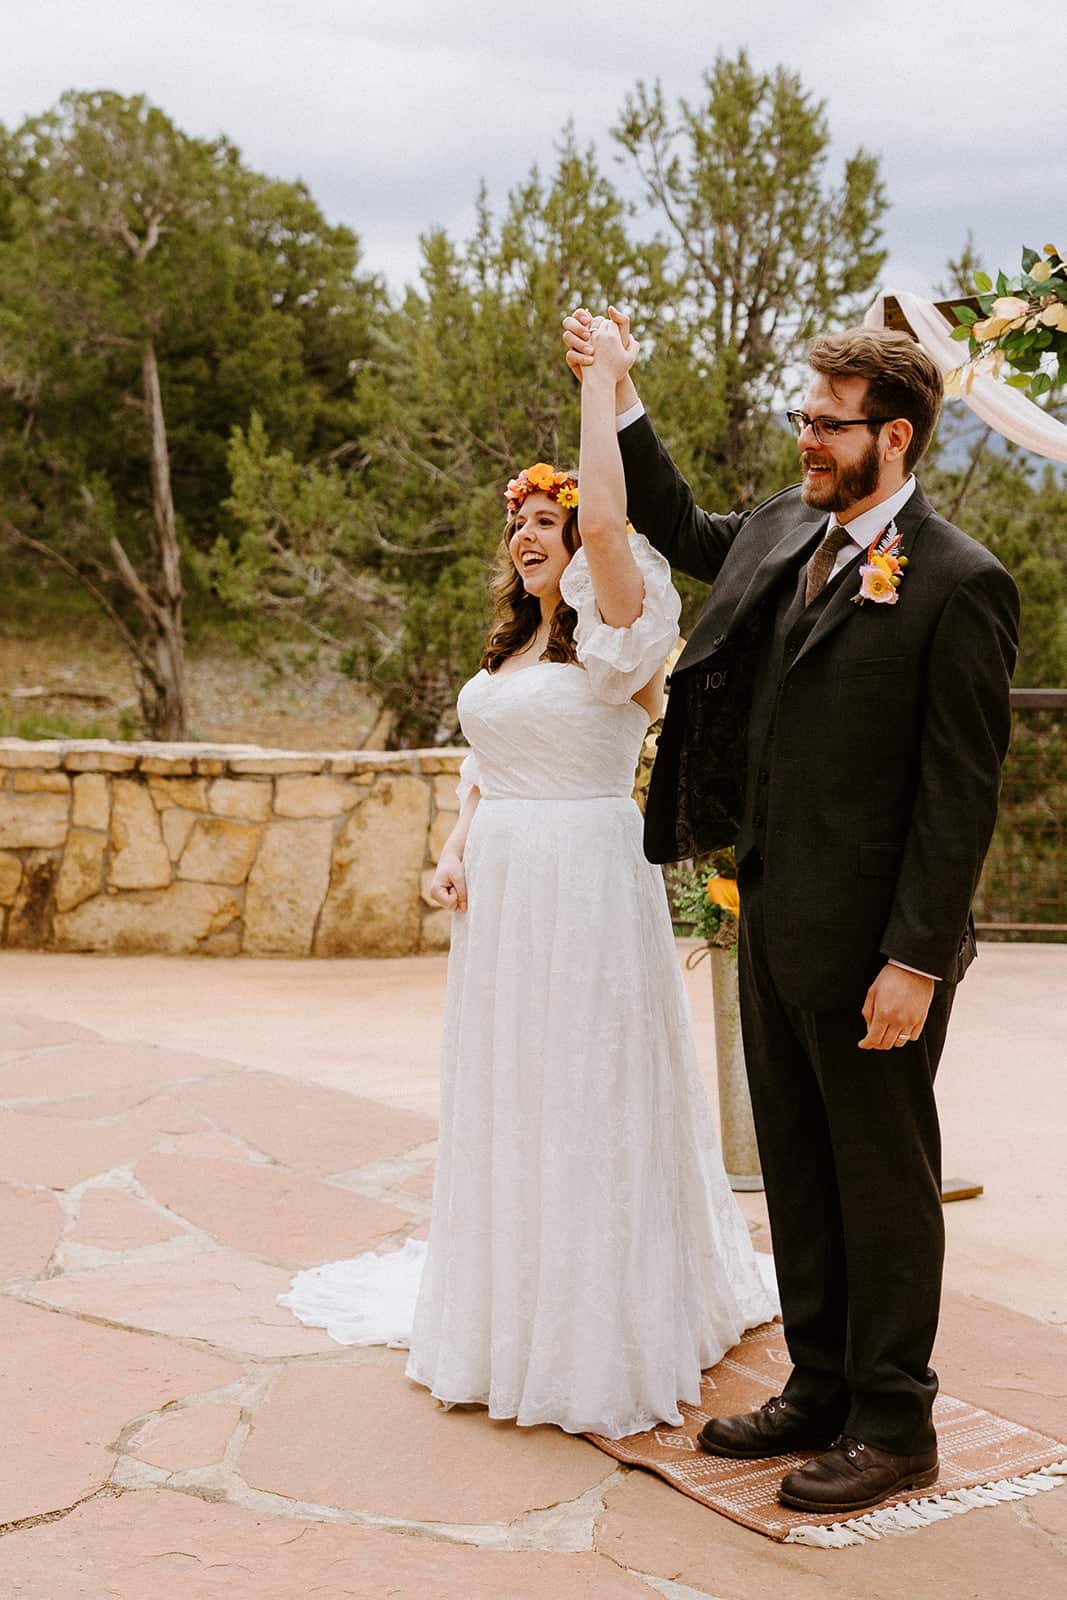 A couple stands side by side holding hands up in celebration after their wedding ceremony